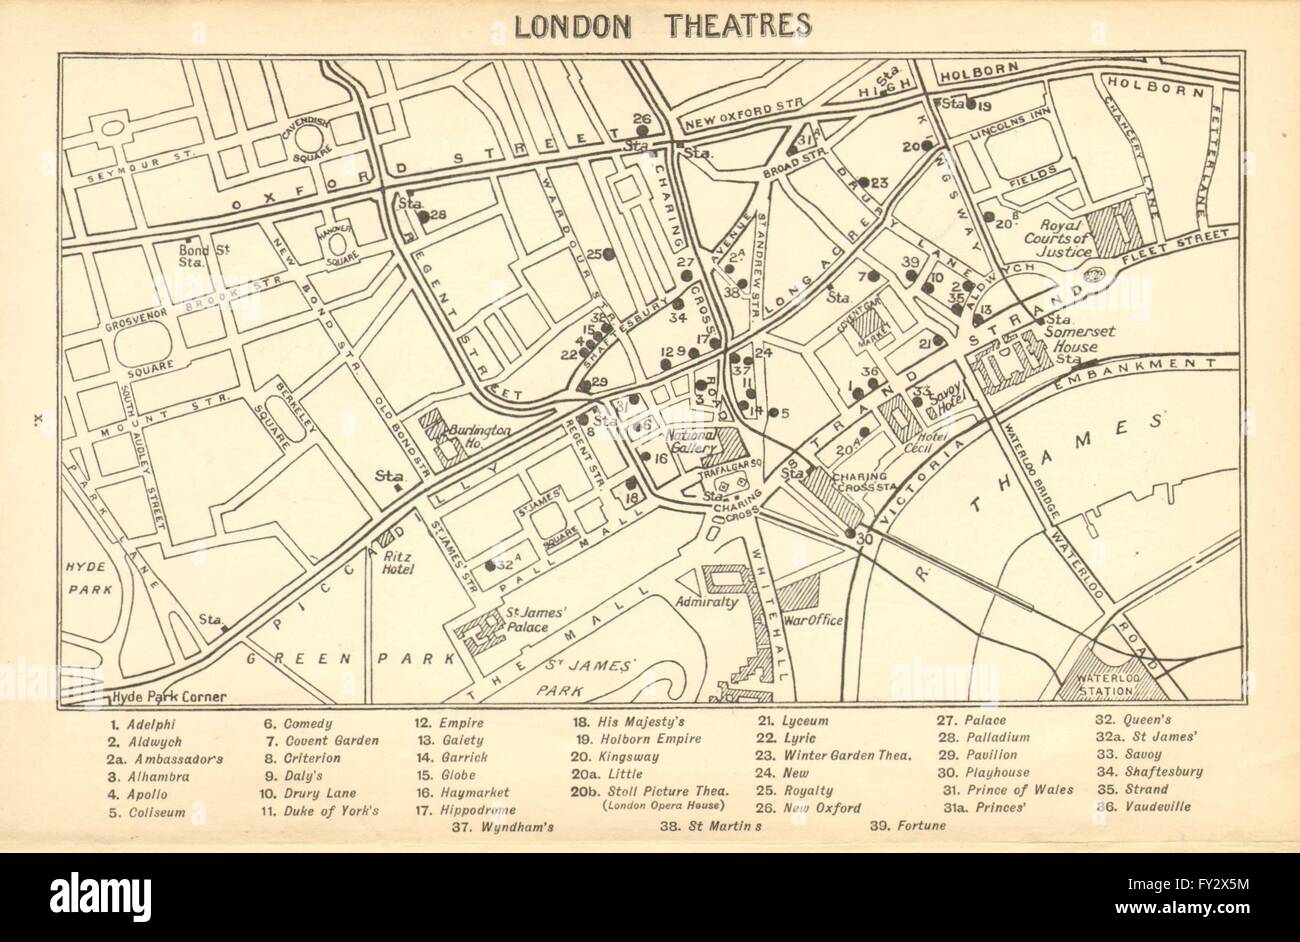 Leicester Square &c 1953 old map LONDON WEST END CINEMAS & NEWS THEATRES 